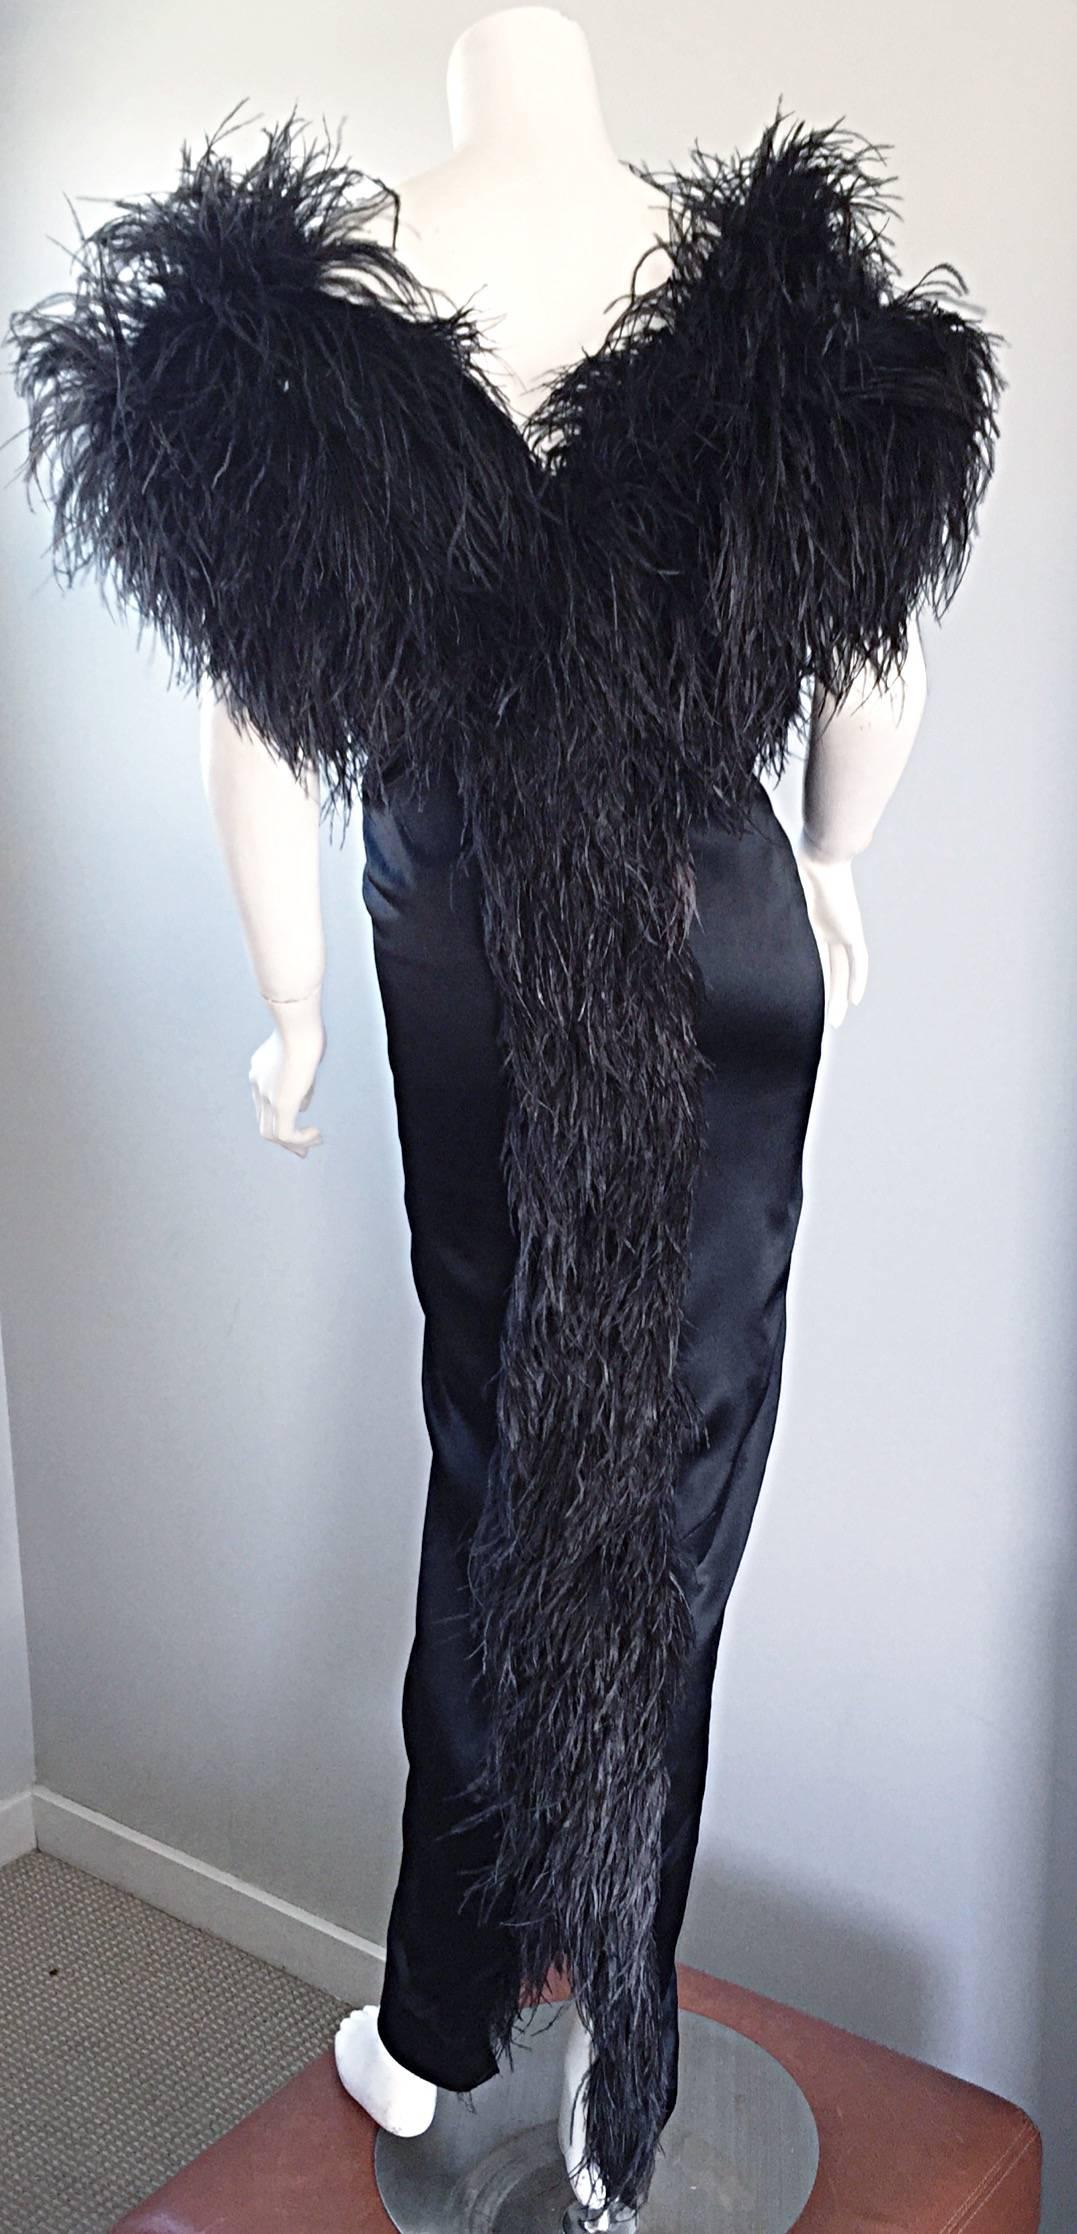 Sensational and rare vintage 1970s HOLLY'S HARP black silk evening dress! Dramatic black ostrich feathers around the bust, and down the center back! Luxurious layers of 'liquid silk' drapes over the body in all the right places, and looks smashing